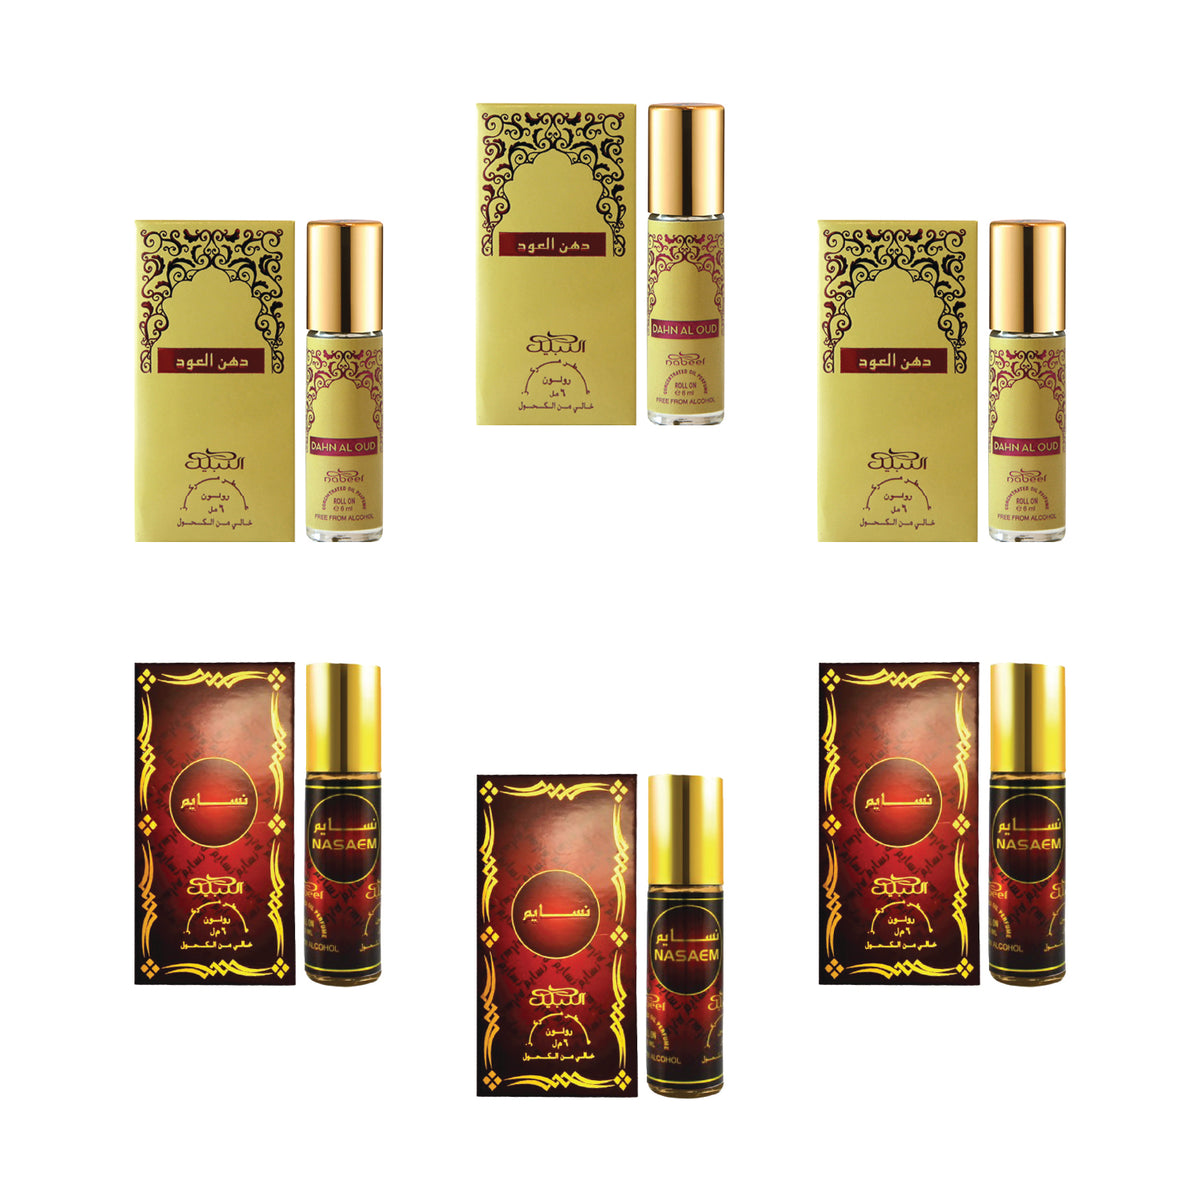 Nabeel - Premium Attar Roll-on Perfume Oil - Collection 10 - Dahn Al Oud, Nasaem | 100% Non Alcoholic | Gift Set - 6ml (Pack of 6) | Made in U.A.E